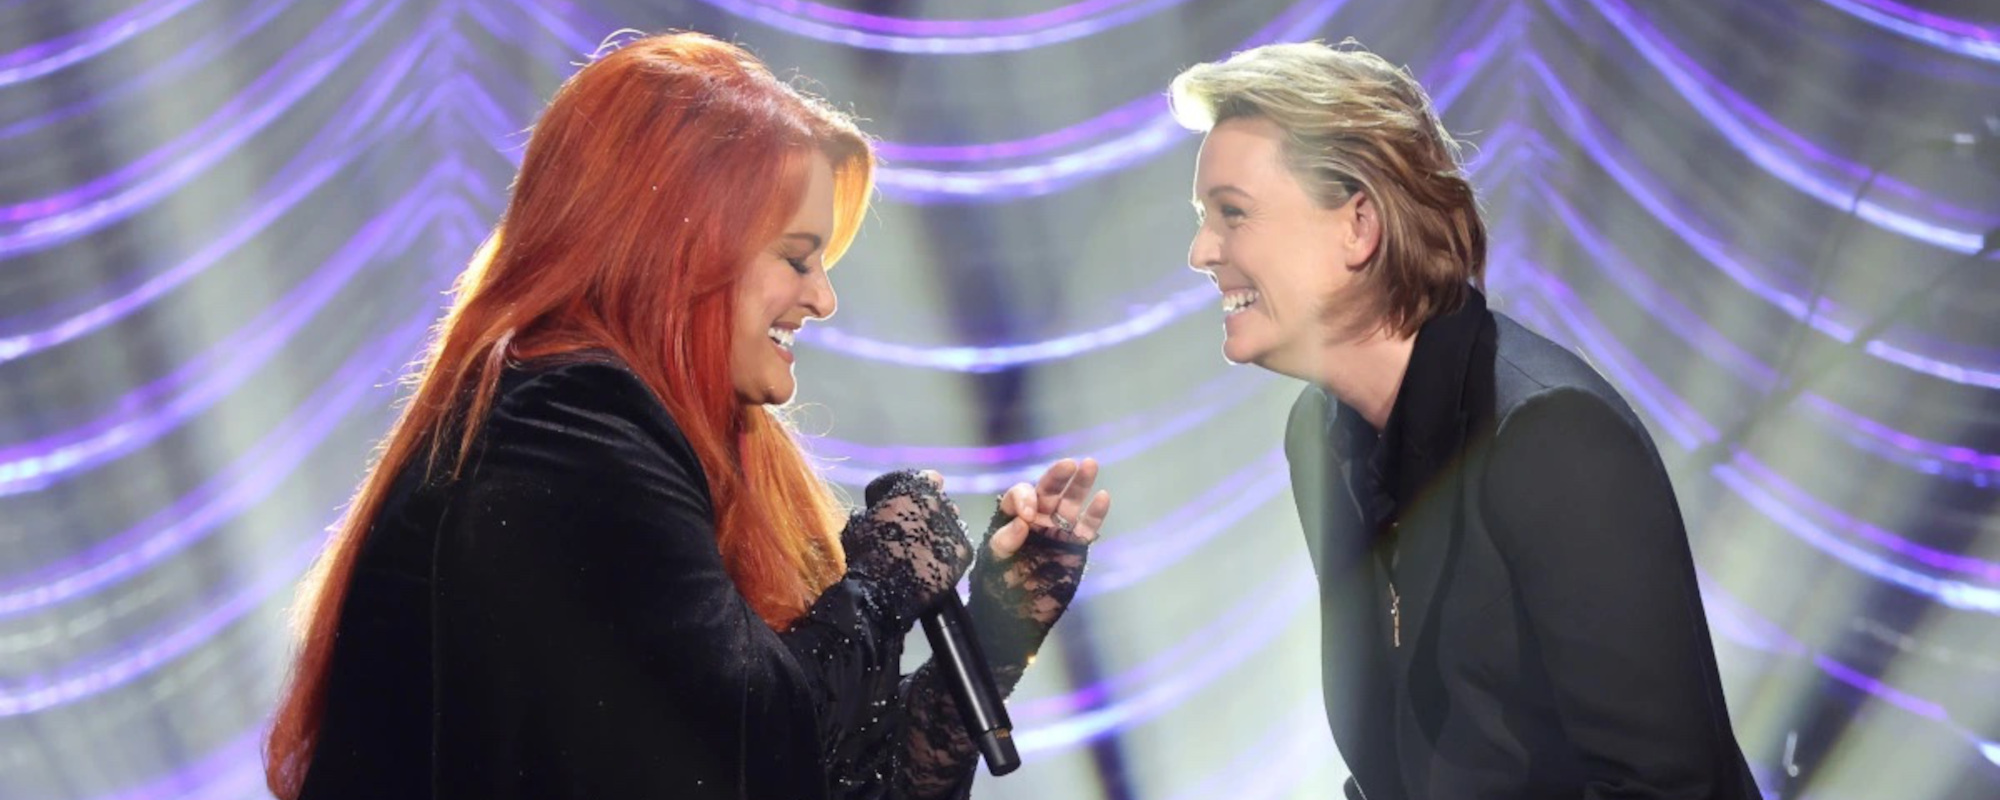 Brandi Carlile Touts Wynonna Judd—“One of the Strongest Most Soulful People I’ve Ever Met”